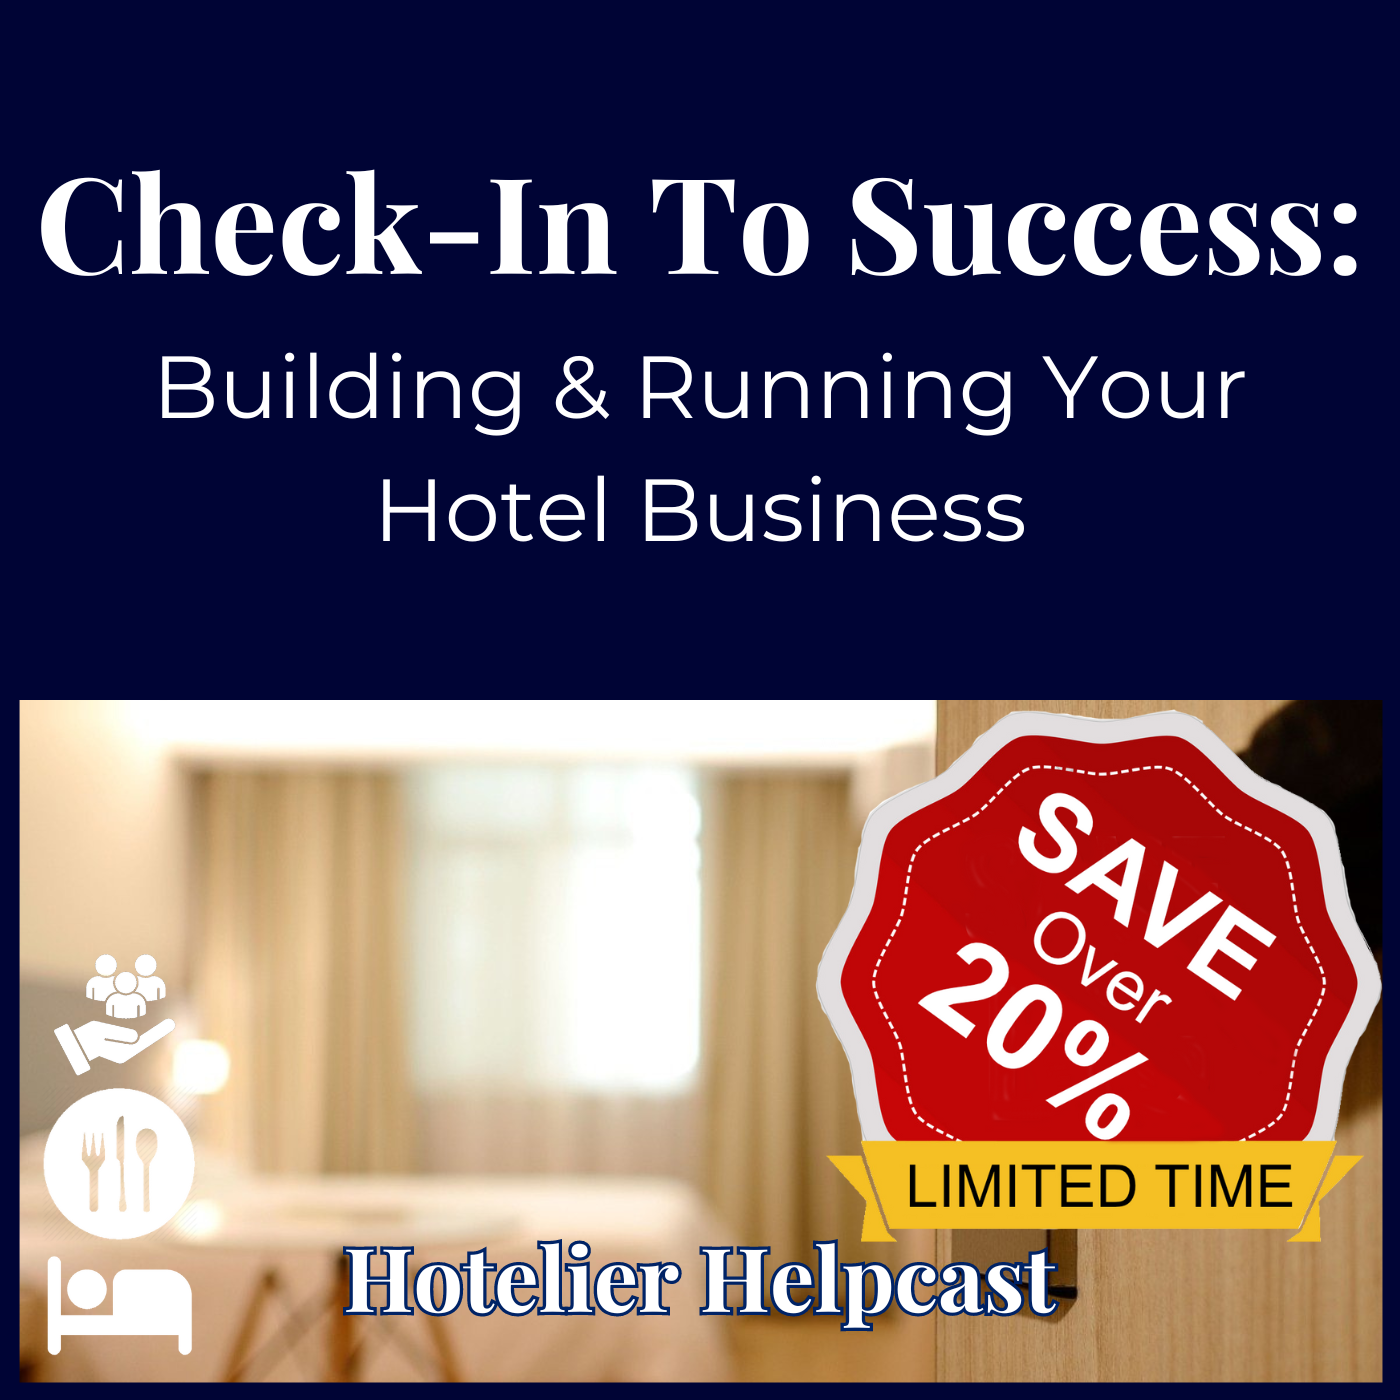 Check-In To Success: Building & Running Your Hotel Business Course